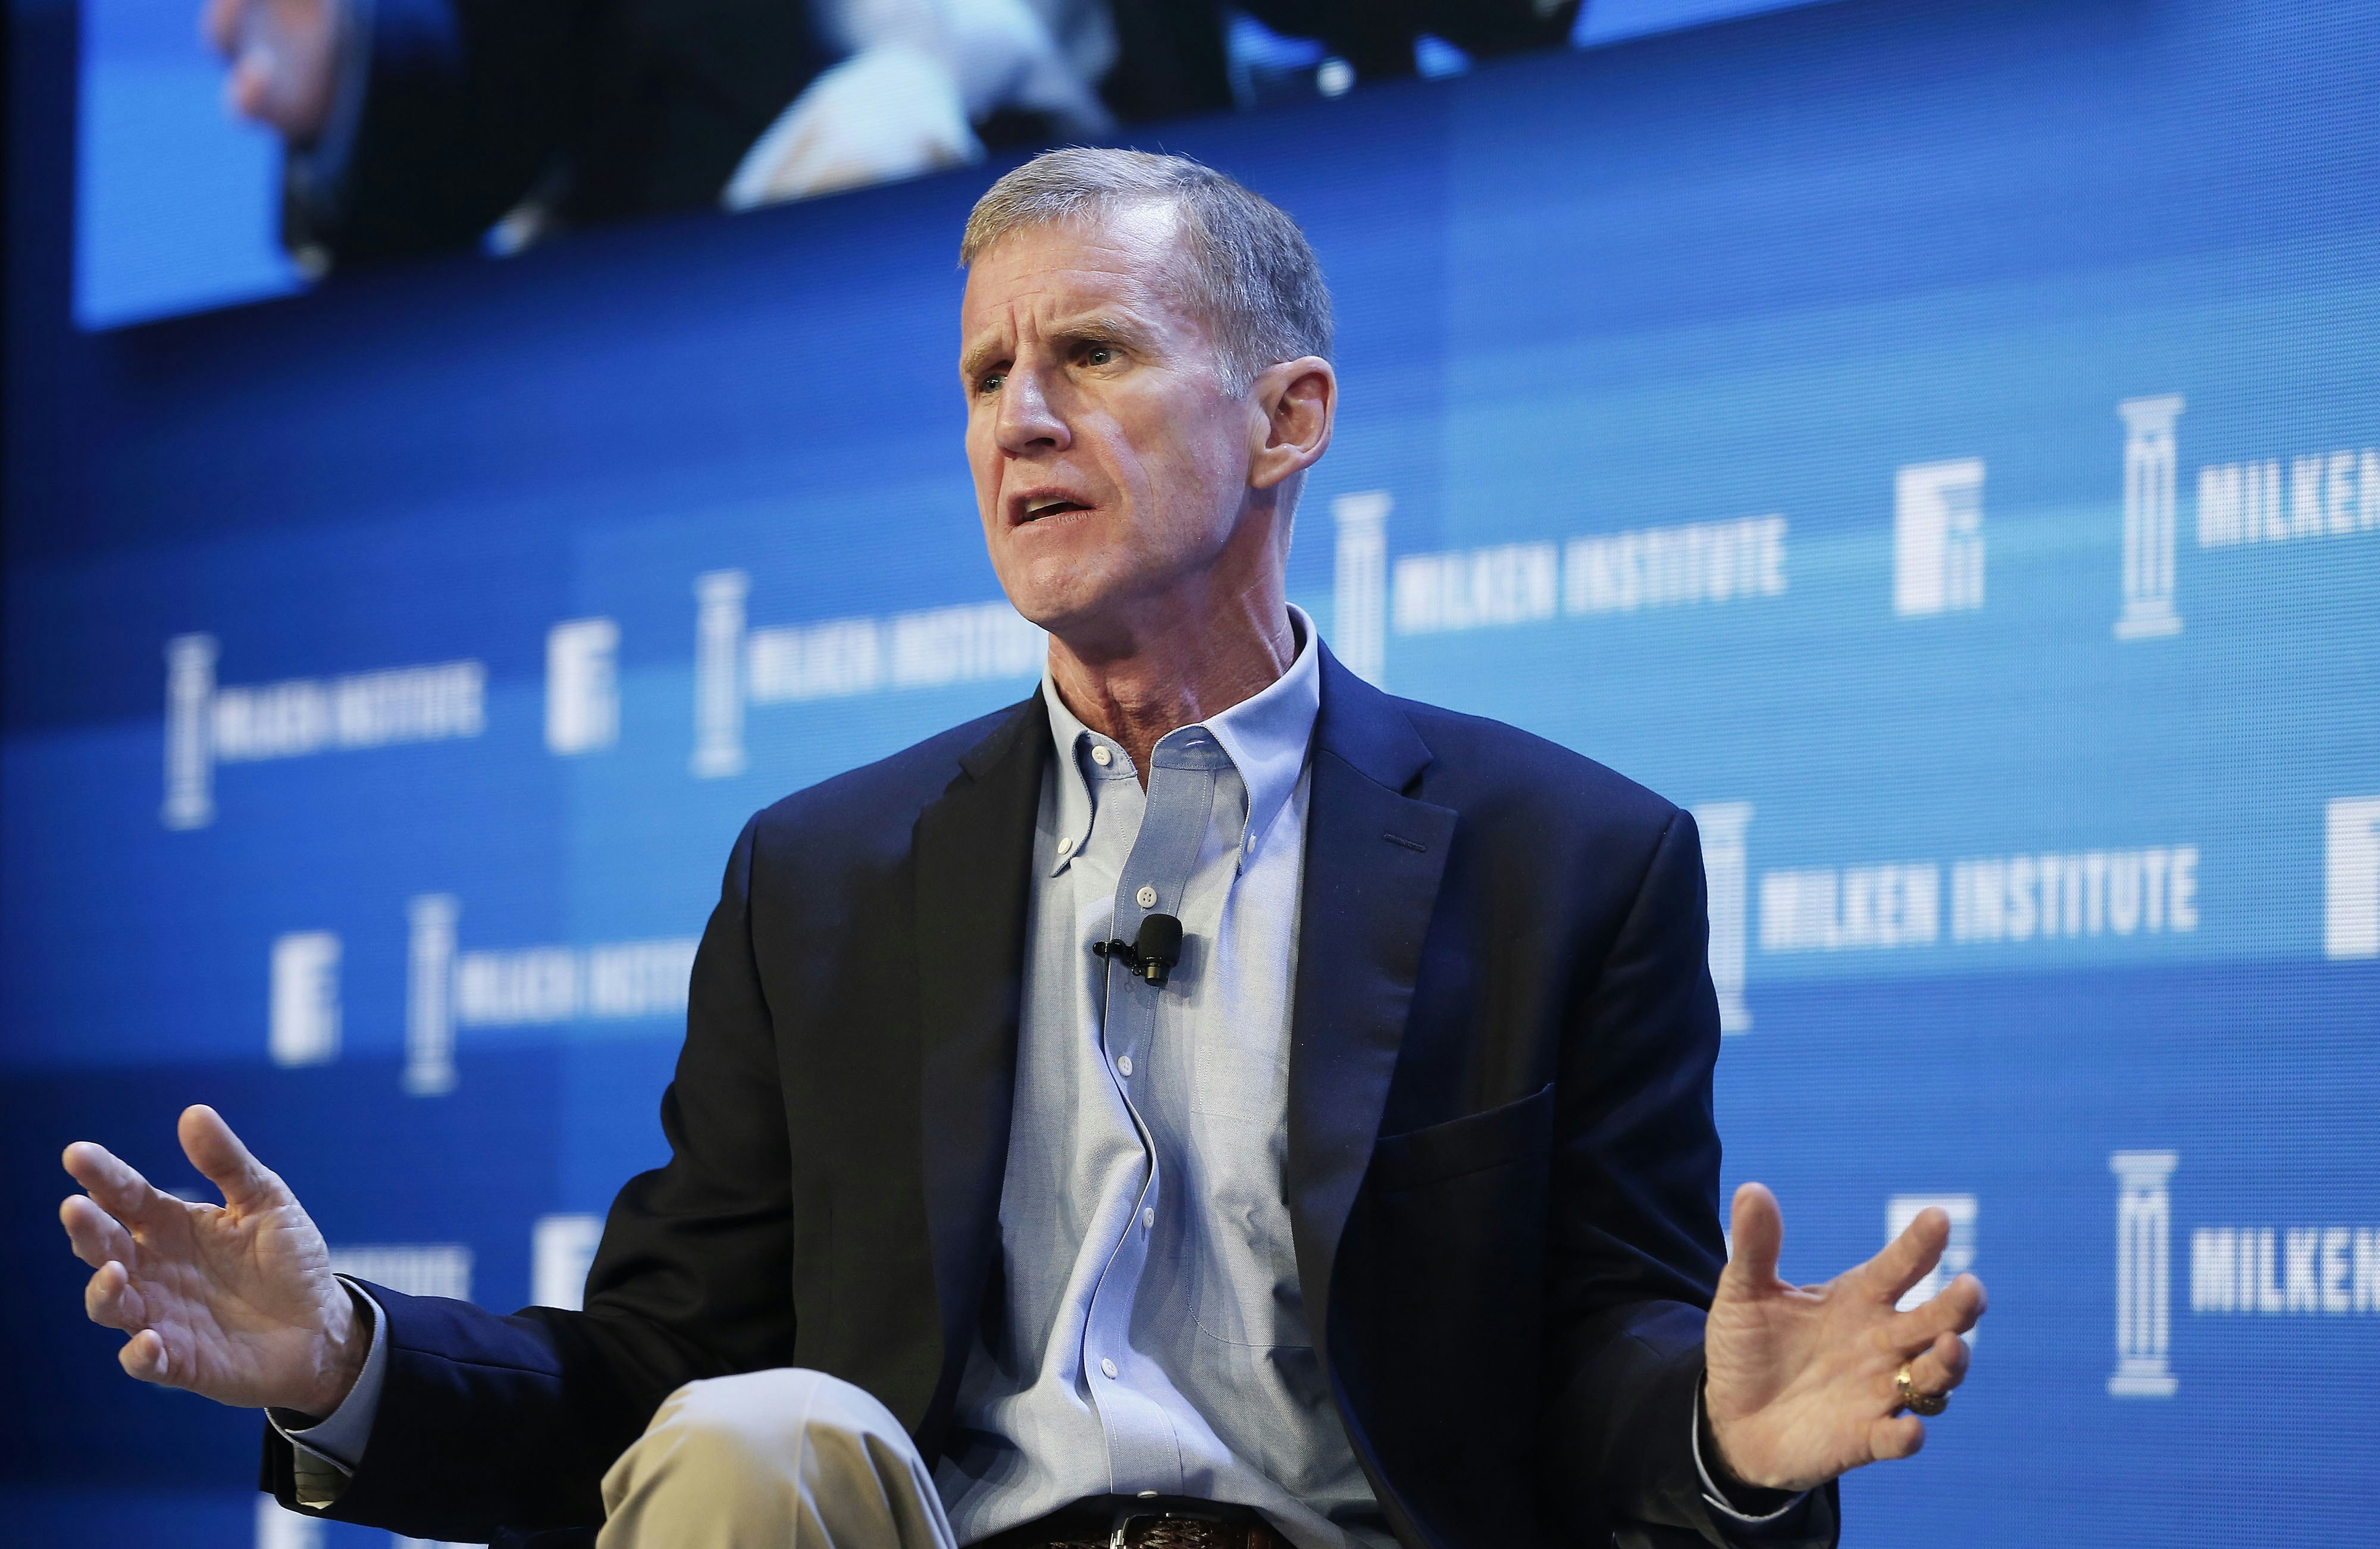 Stanley McChrystal, chairman of Siemens Government Technologies Inc., speaks during the annual Milken Institute Global Conference in Beverly Hills, California, U.S., on Monday, May 2, 2016. The conference gathers attendees to explore solutions to today's most pressing challenges in financial markets, industry sectors, health, government and education. Photographer: Patrick T. Fallon/Bloomberg via Getty Images